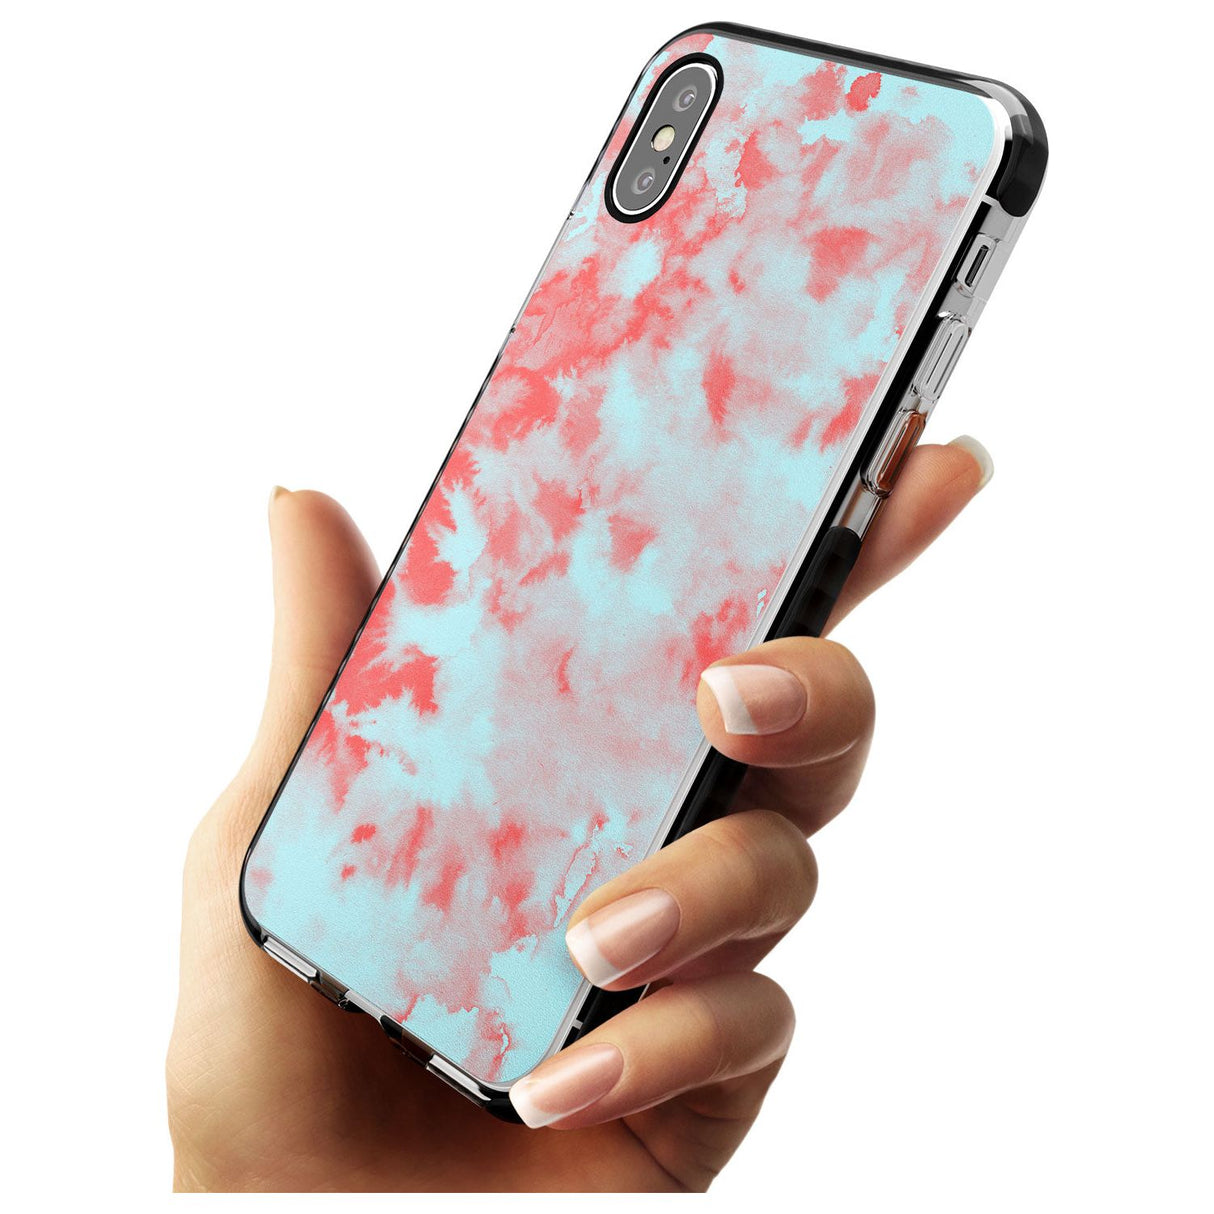 Red & Blue Acid Wash Tie-Dye Pattern Black Impact Phone Case for iPhone X XS Max XR